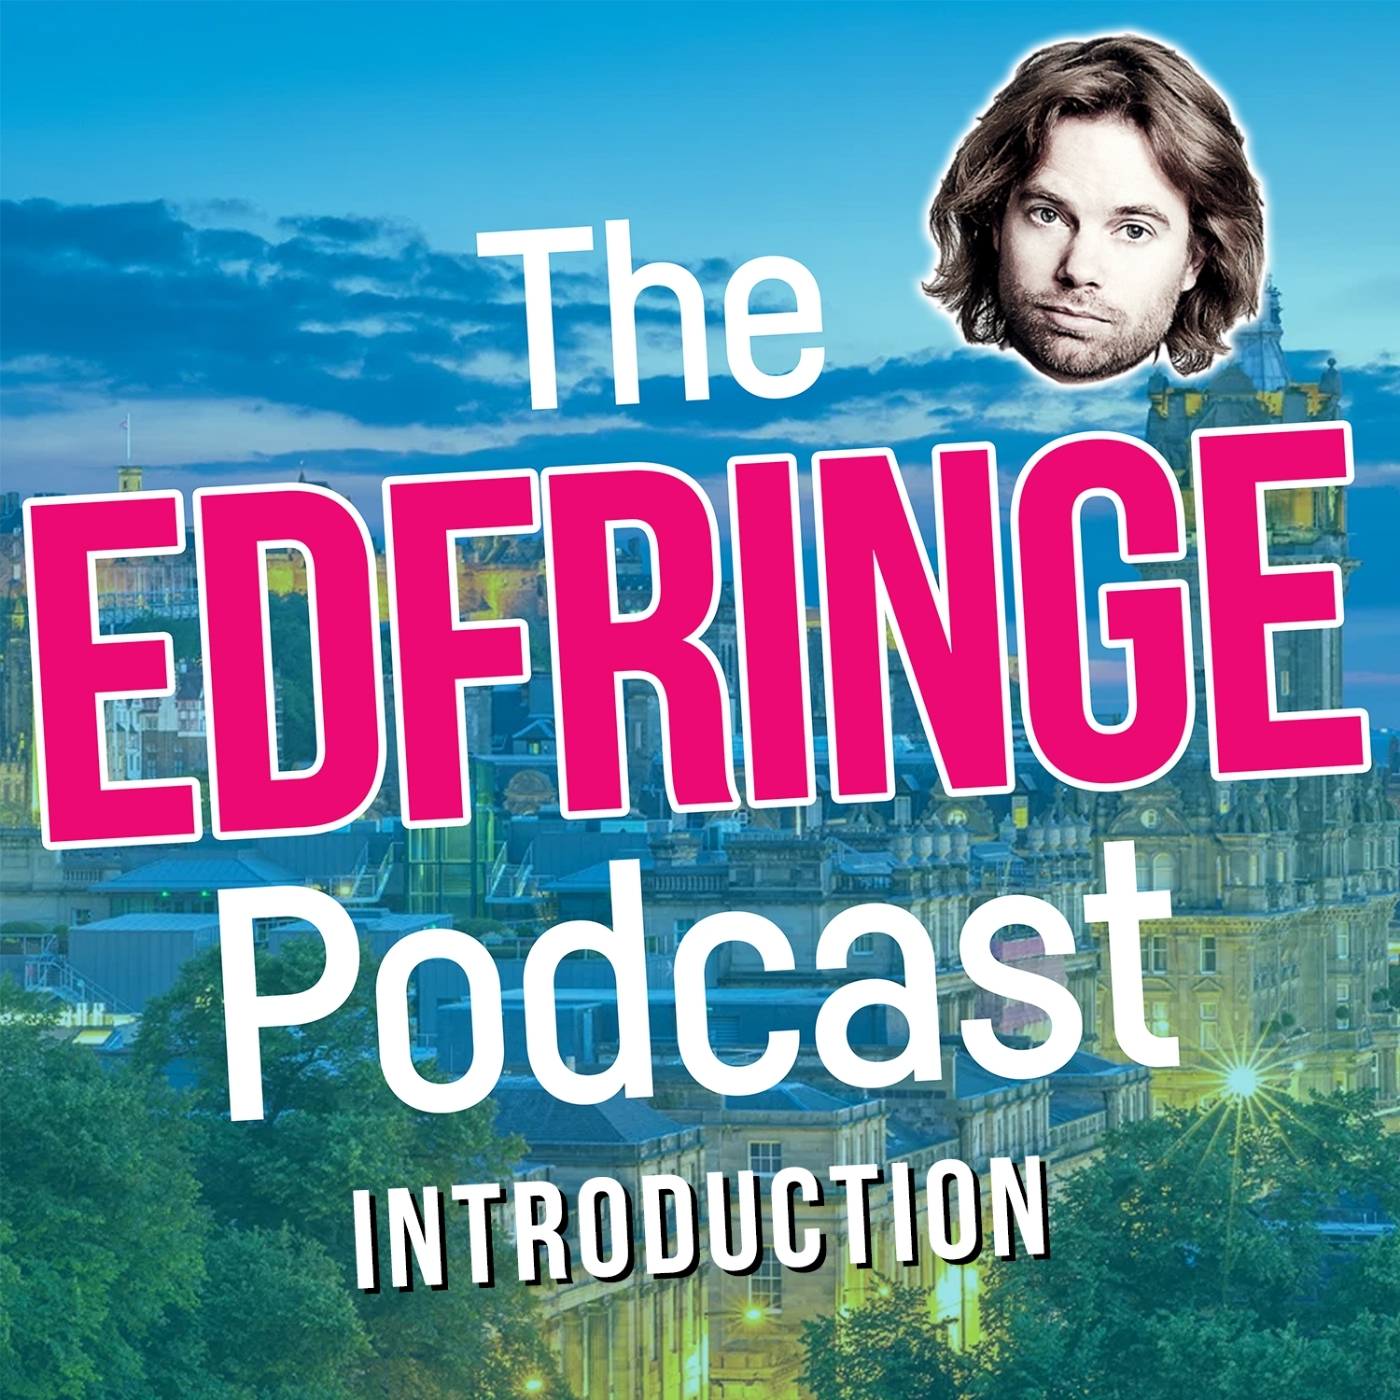 Introduction to the EdFringe podcast!